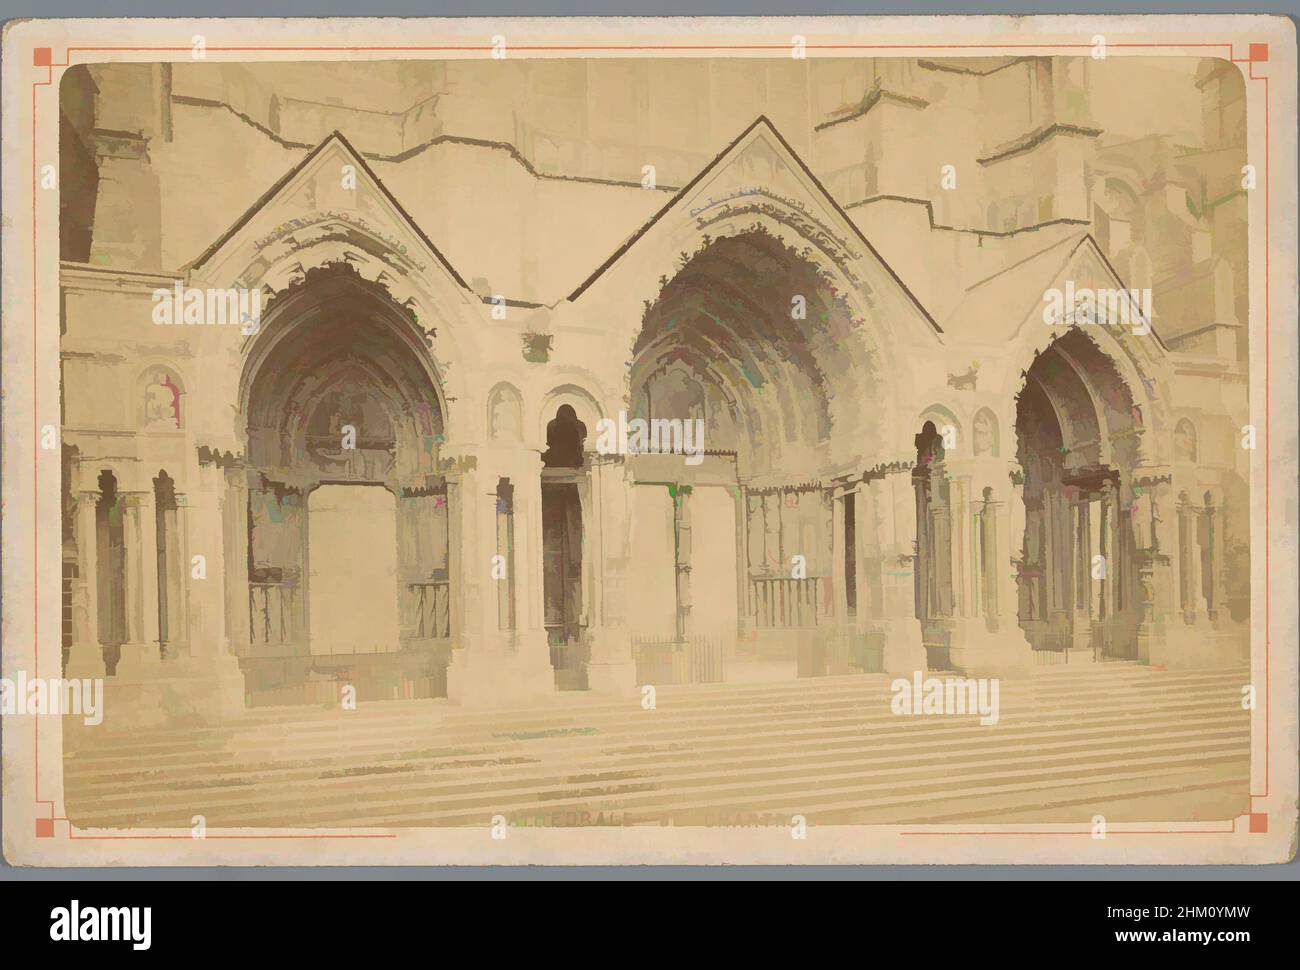 Art inspired by Portal of the cathedral at Chartres, Cathedrale de Chartres, portail nord, Chartres, 1850 - 1900, cardboard, albumen print, height 107 mm × width 164 mm, Classic works modernized by Artotop with a splash of modernity. Shapes, color and value, eye-catching visual impact on art. Emotions through freedom of artworks in a contemporary way. A timeless message pursuing a wildly creative new direction. Artists turning to the digital medium and creating the Artotop NFT Stock Photo